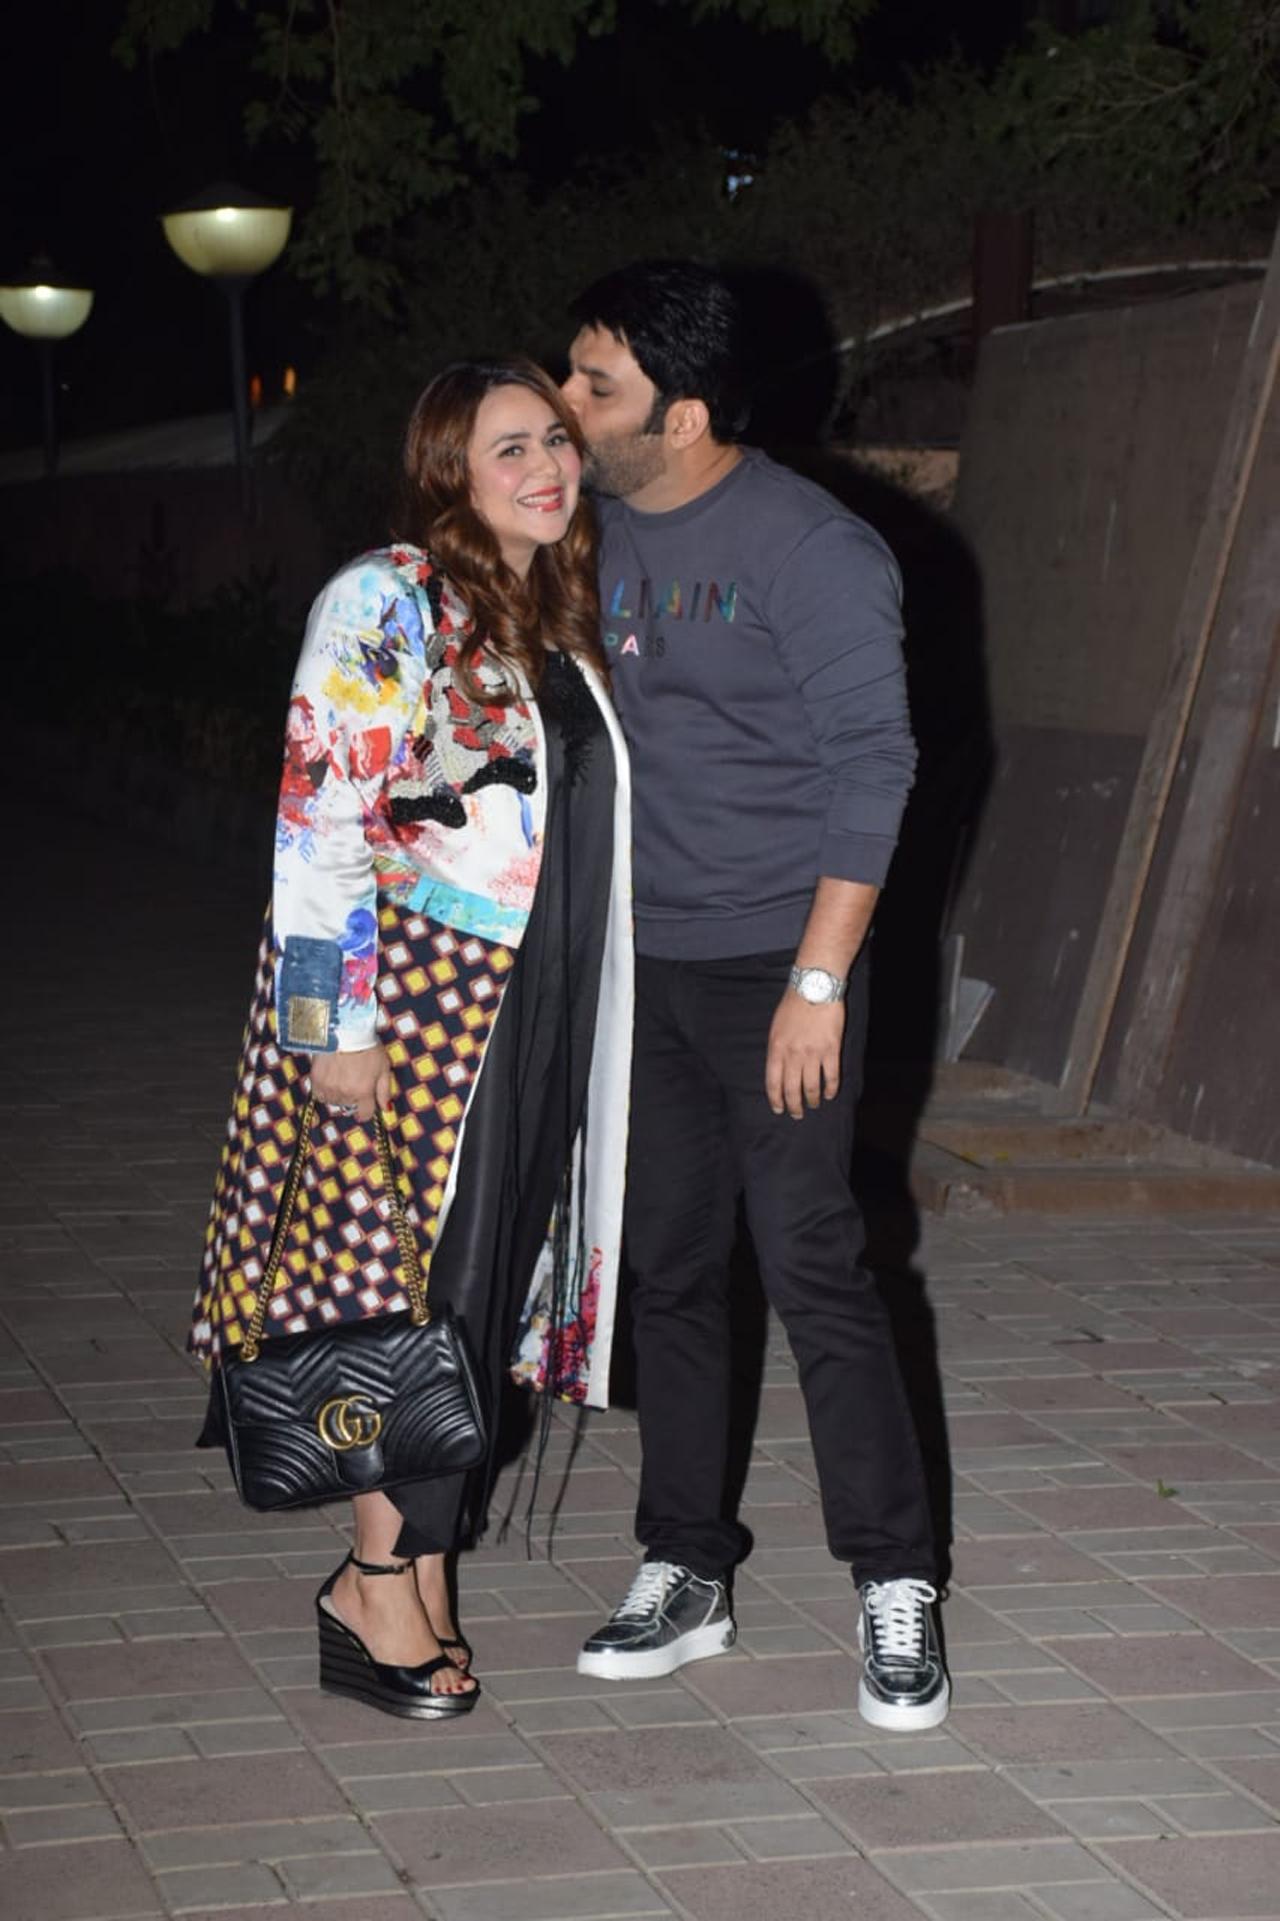 Kapil Sharma and Ginni Chatrath were caught in PDA by the paparazzi as they attended Deepika Padukone's digital debut Gehraiyaan's special screening.